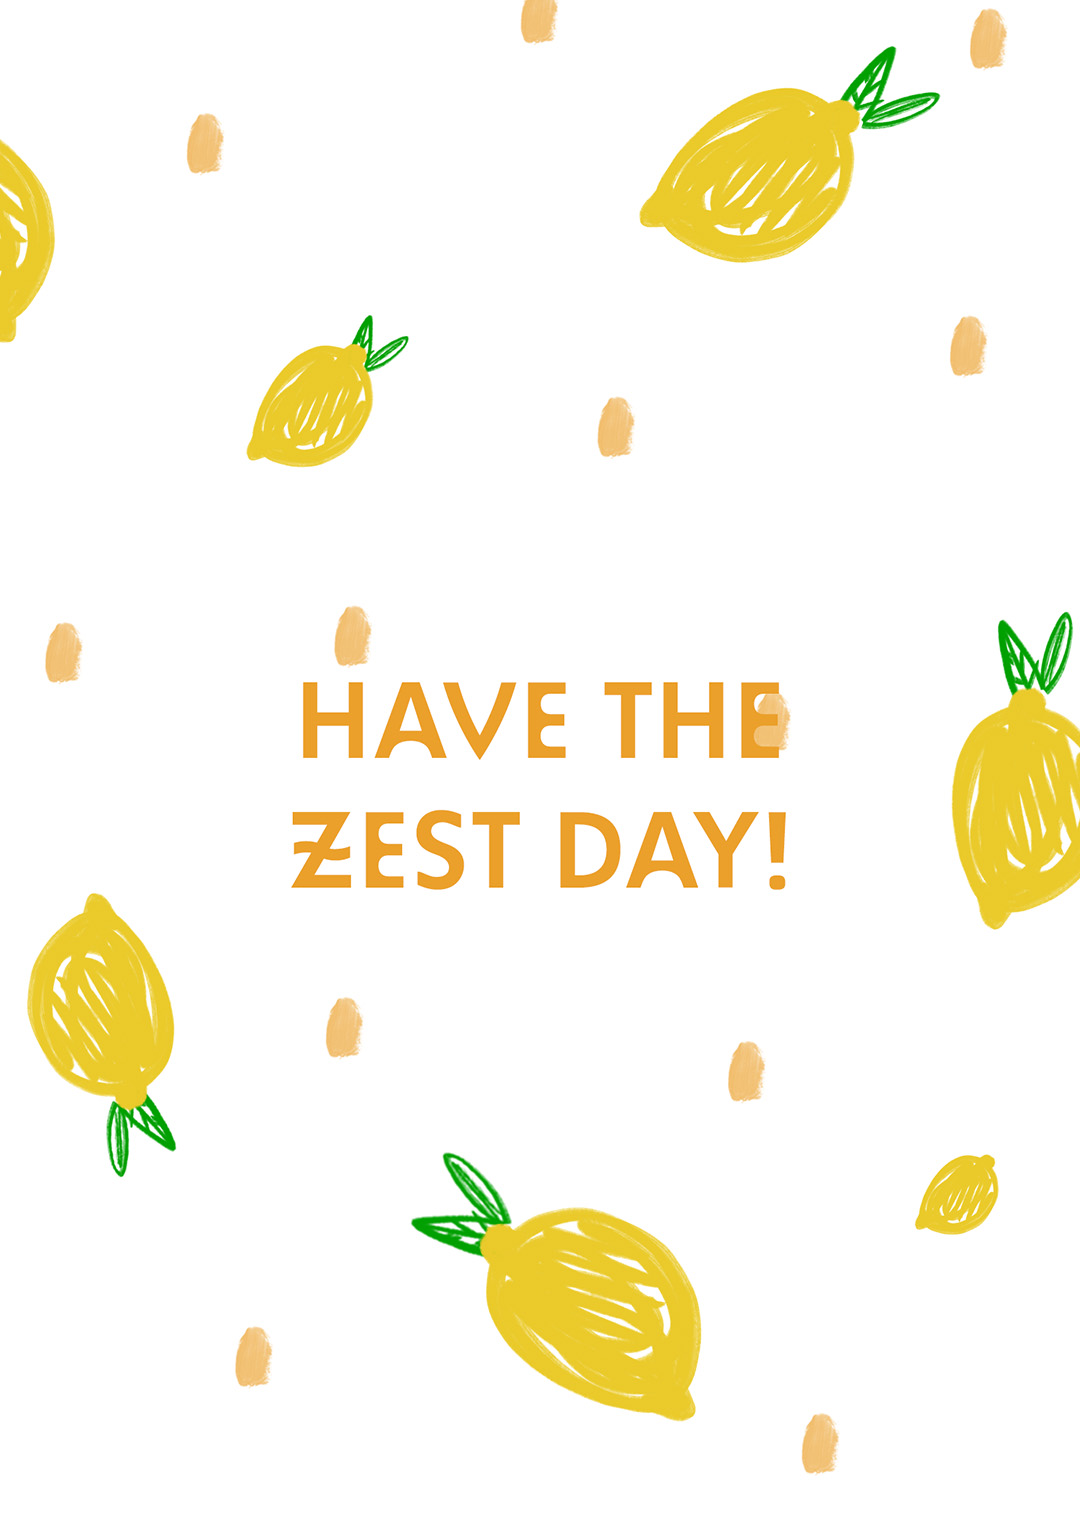 Have The Zest Day Greetings Card